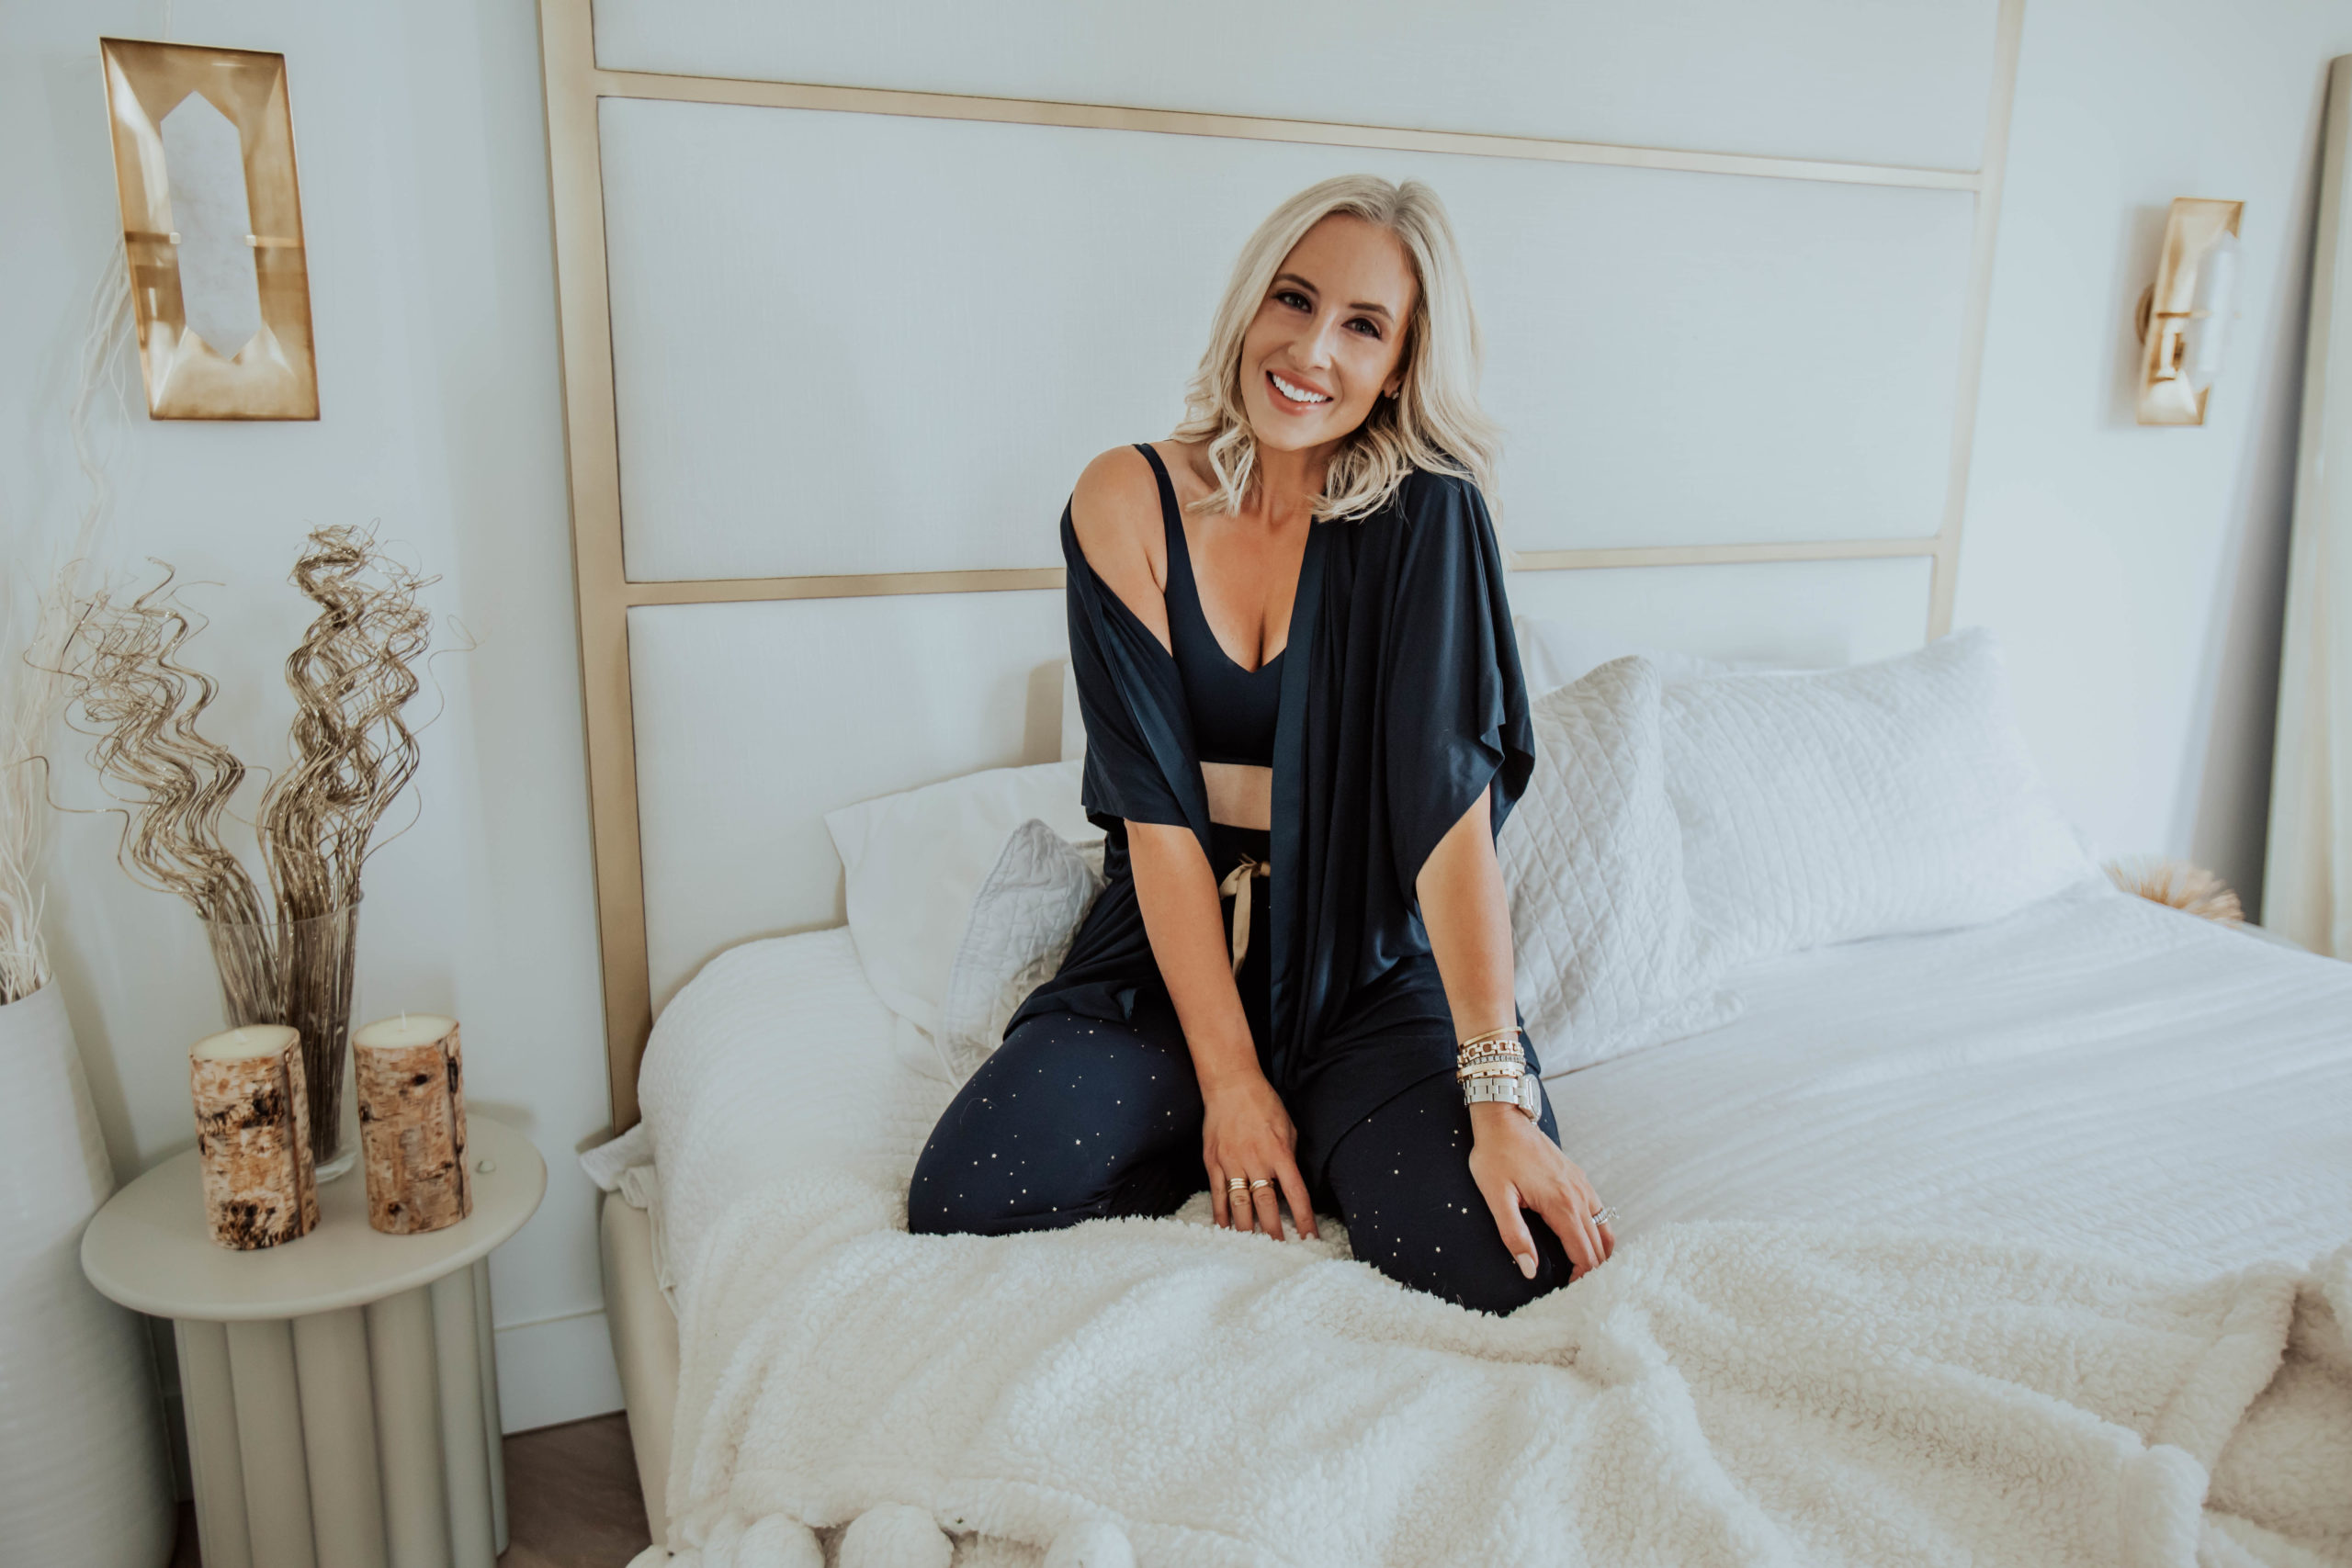 Reno bloggers Ashley Zeal and Emily Wieczorek from The Ashley and Emily Blog share their favorite holiday pajamas. 